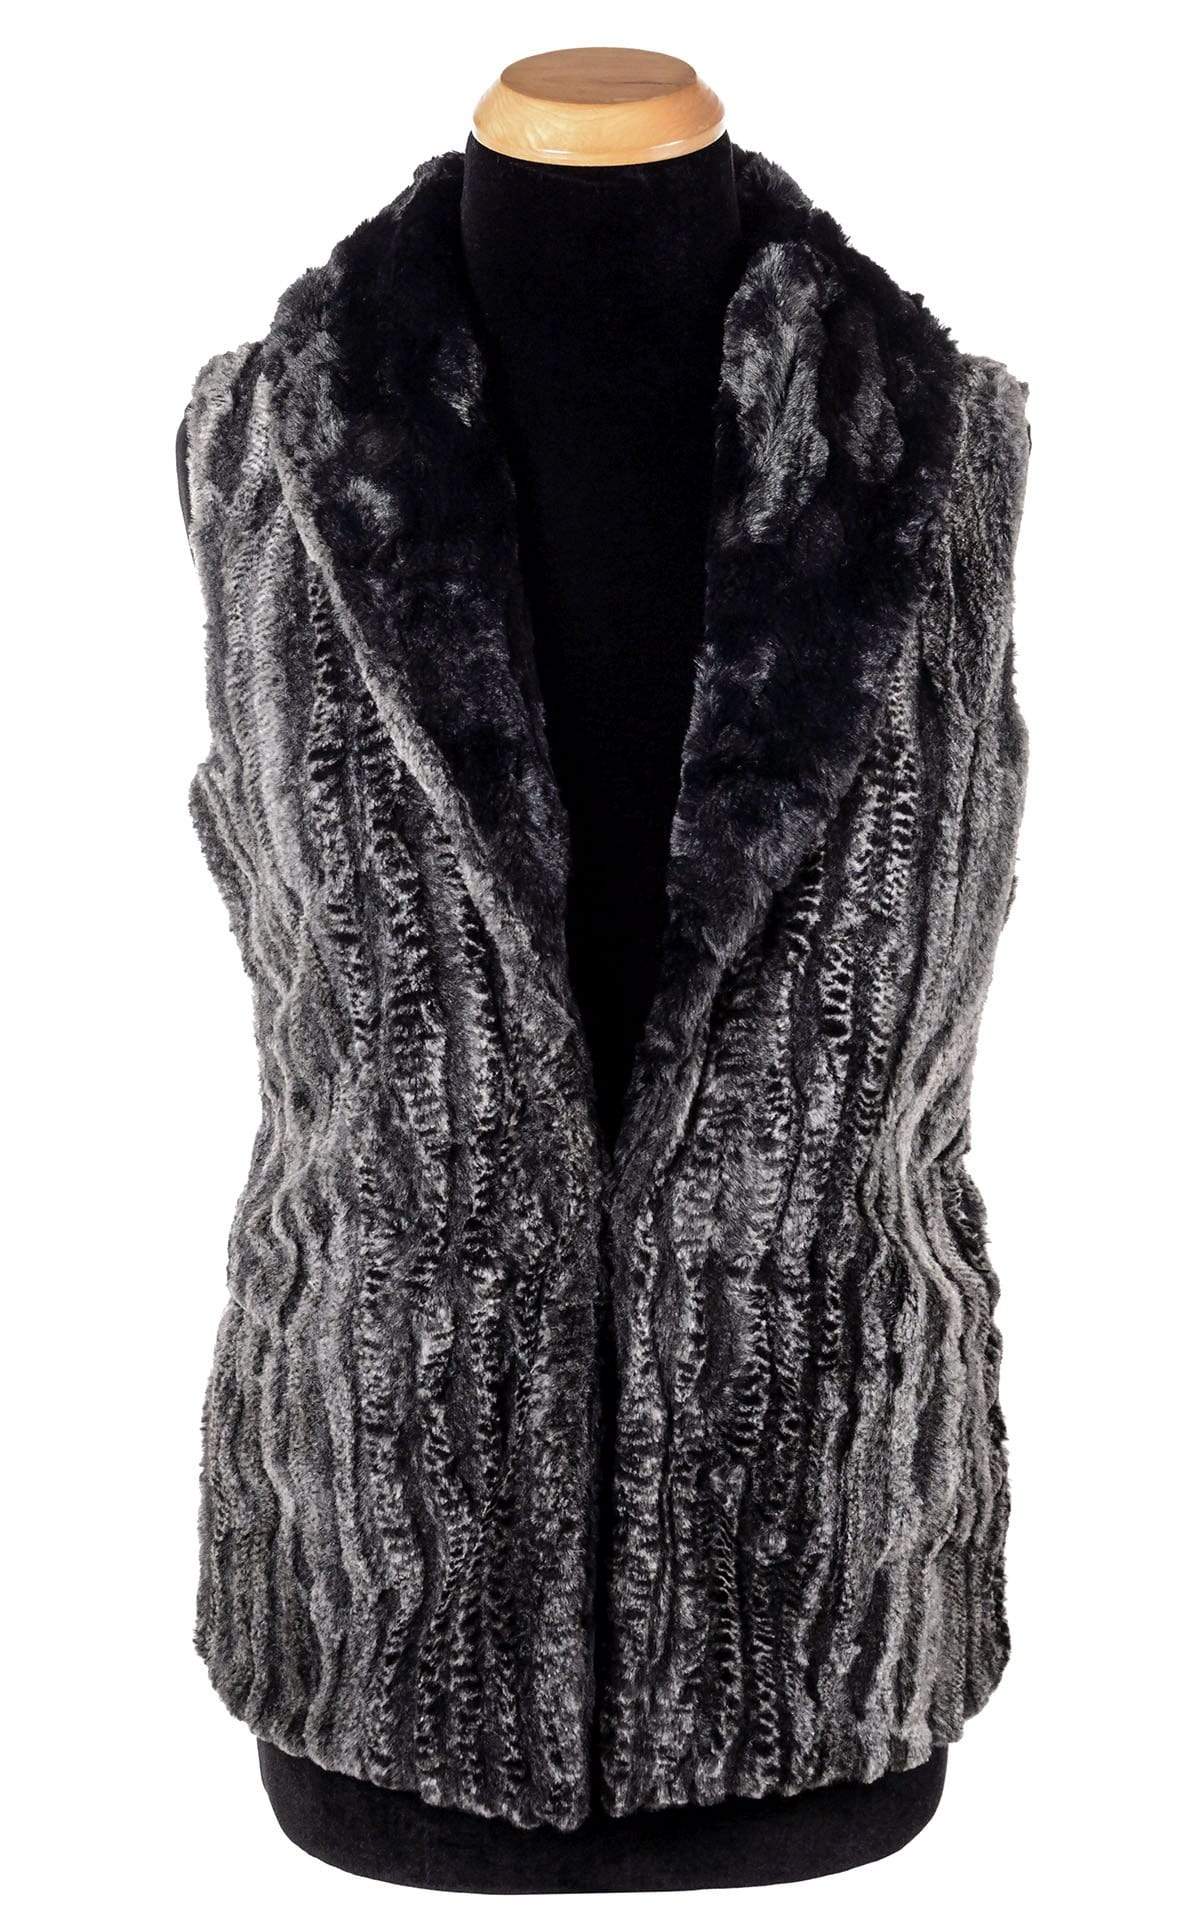 Shawl Collar Vest | Rattle N Shake Black Gray Snake Print Faux Fur with Cuddly Faux Fur in Black | By Pandemonium Millinery | Seattle WA USA